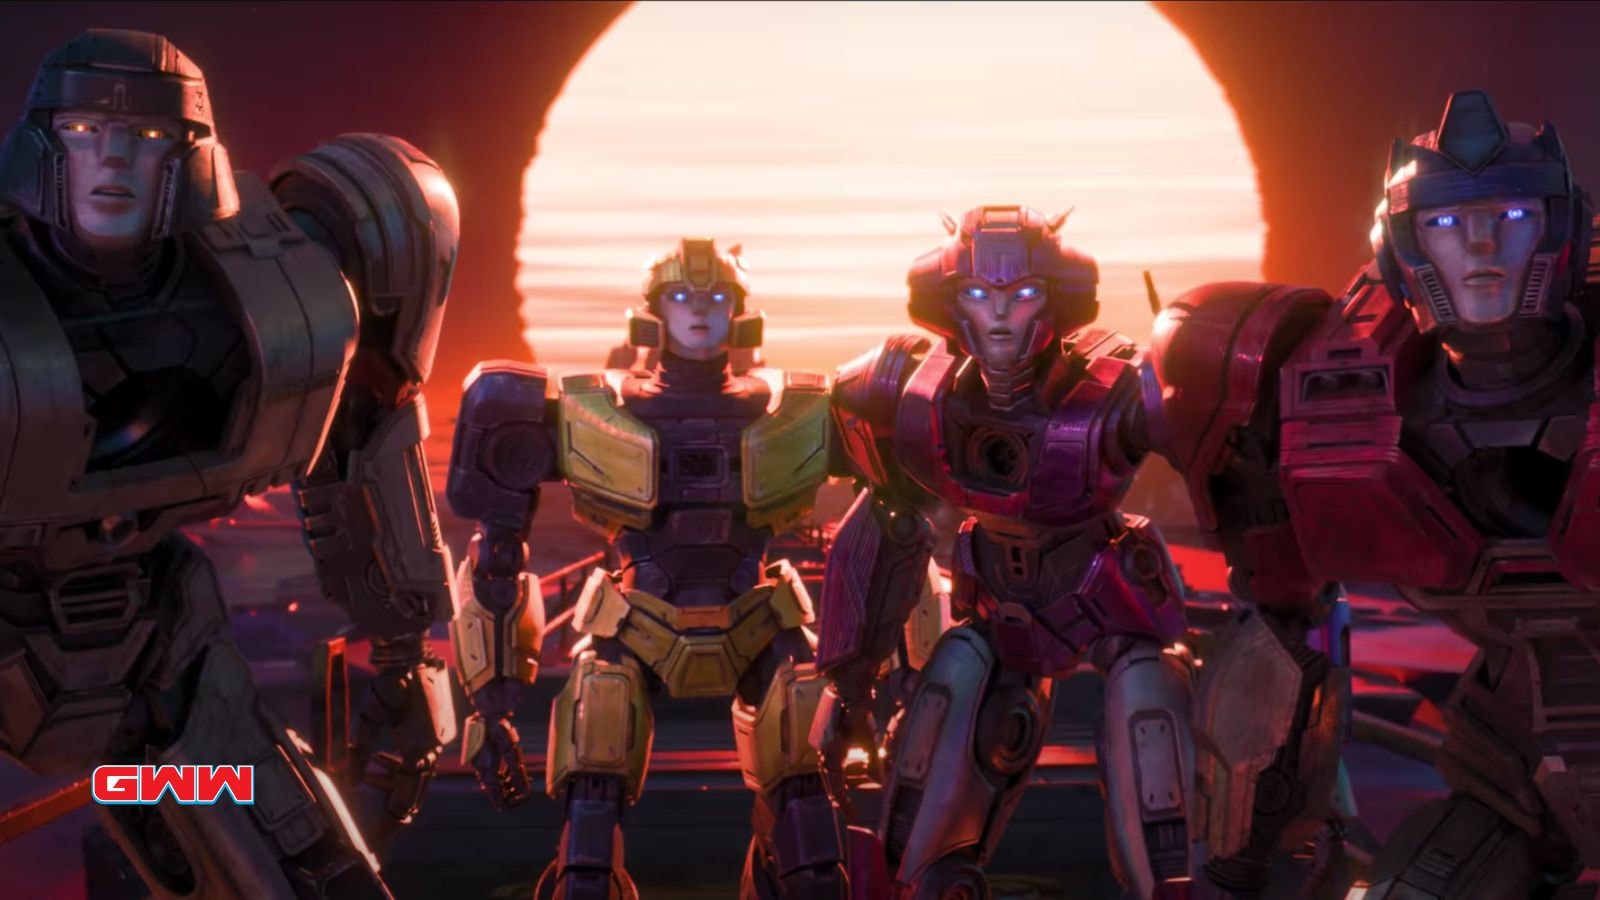 D-16, B-127, Elita -1, and Orion Pax, Transformers One Trailer